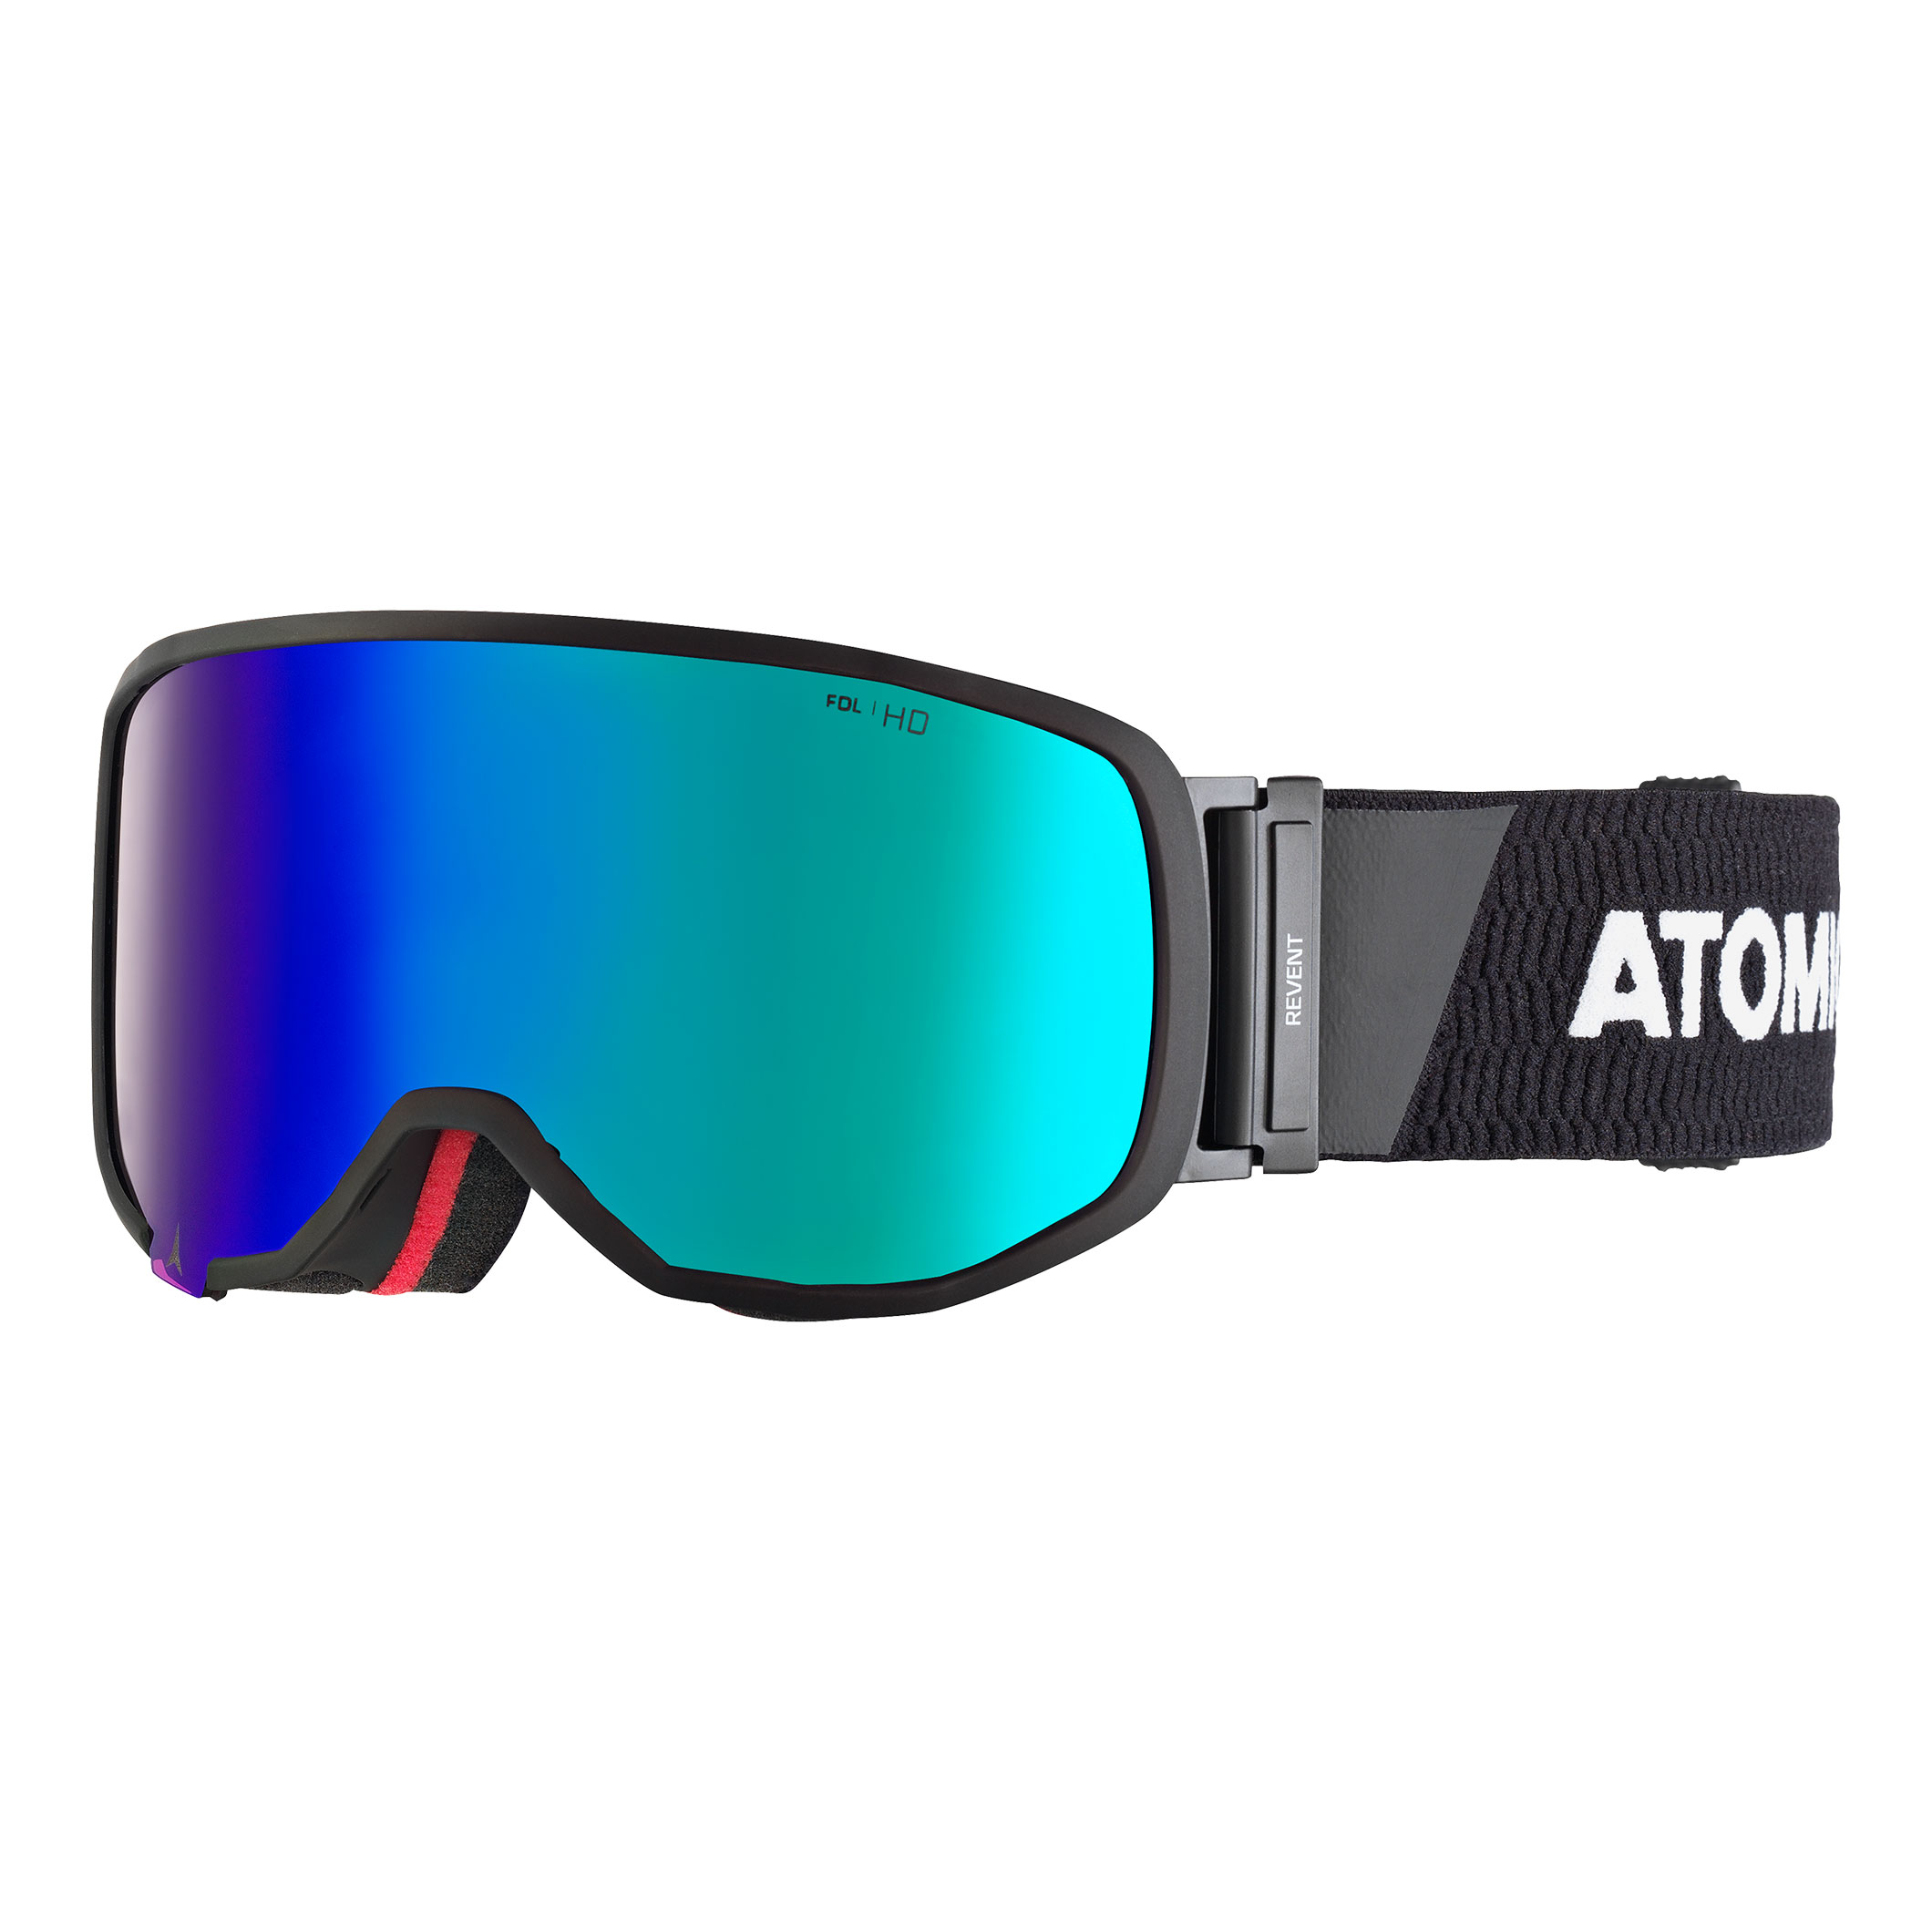  Snowboard Goggles	 -  atomic REVENT S RS FDL HD